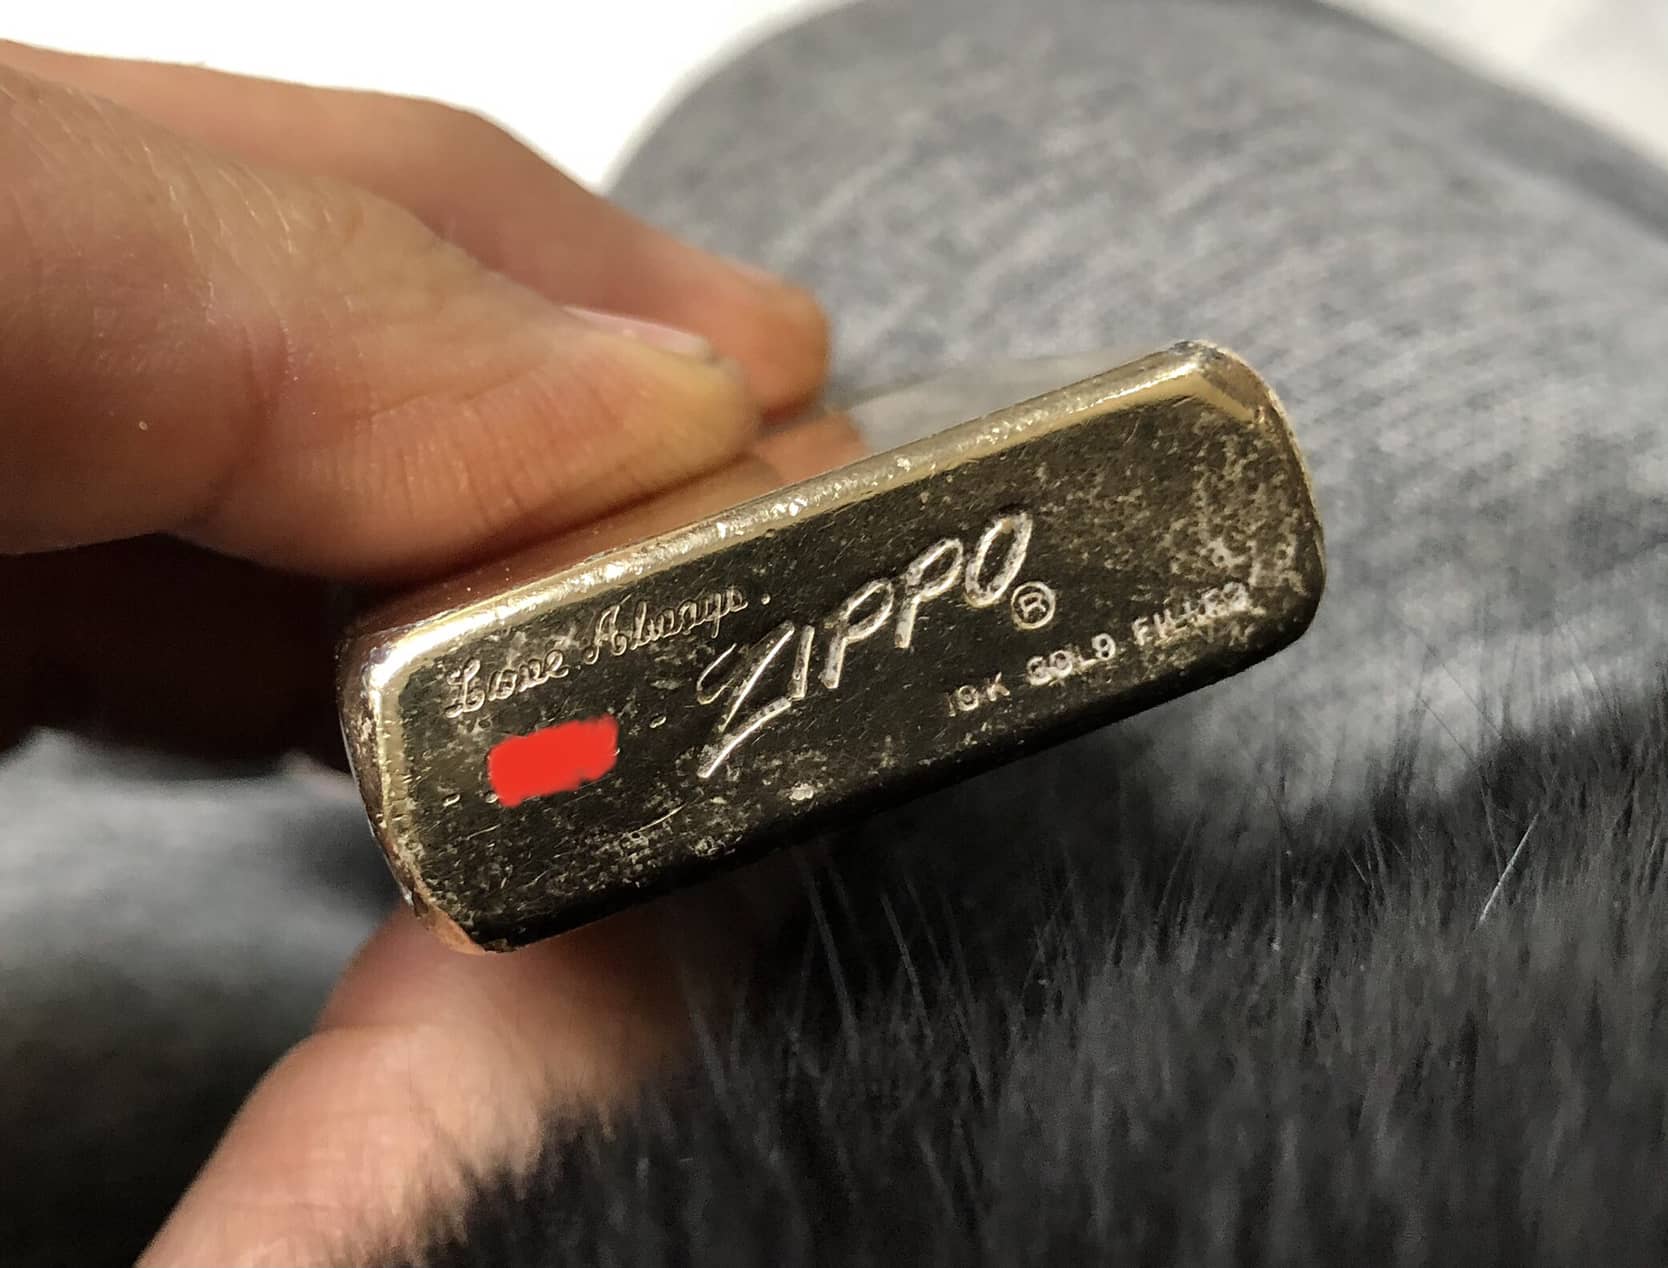 Any Zippo lighter experts in the house? | Friendly Metal Detecting